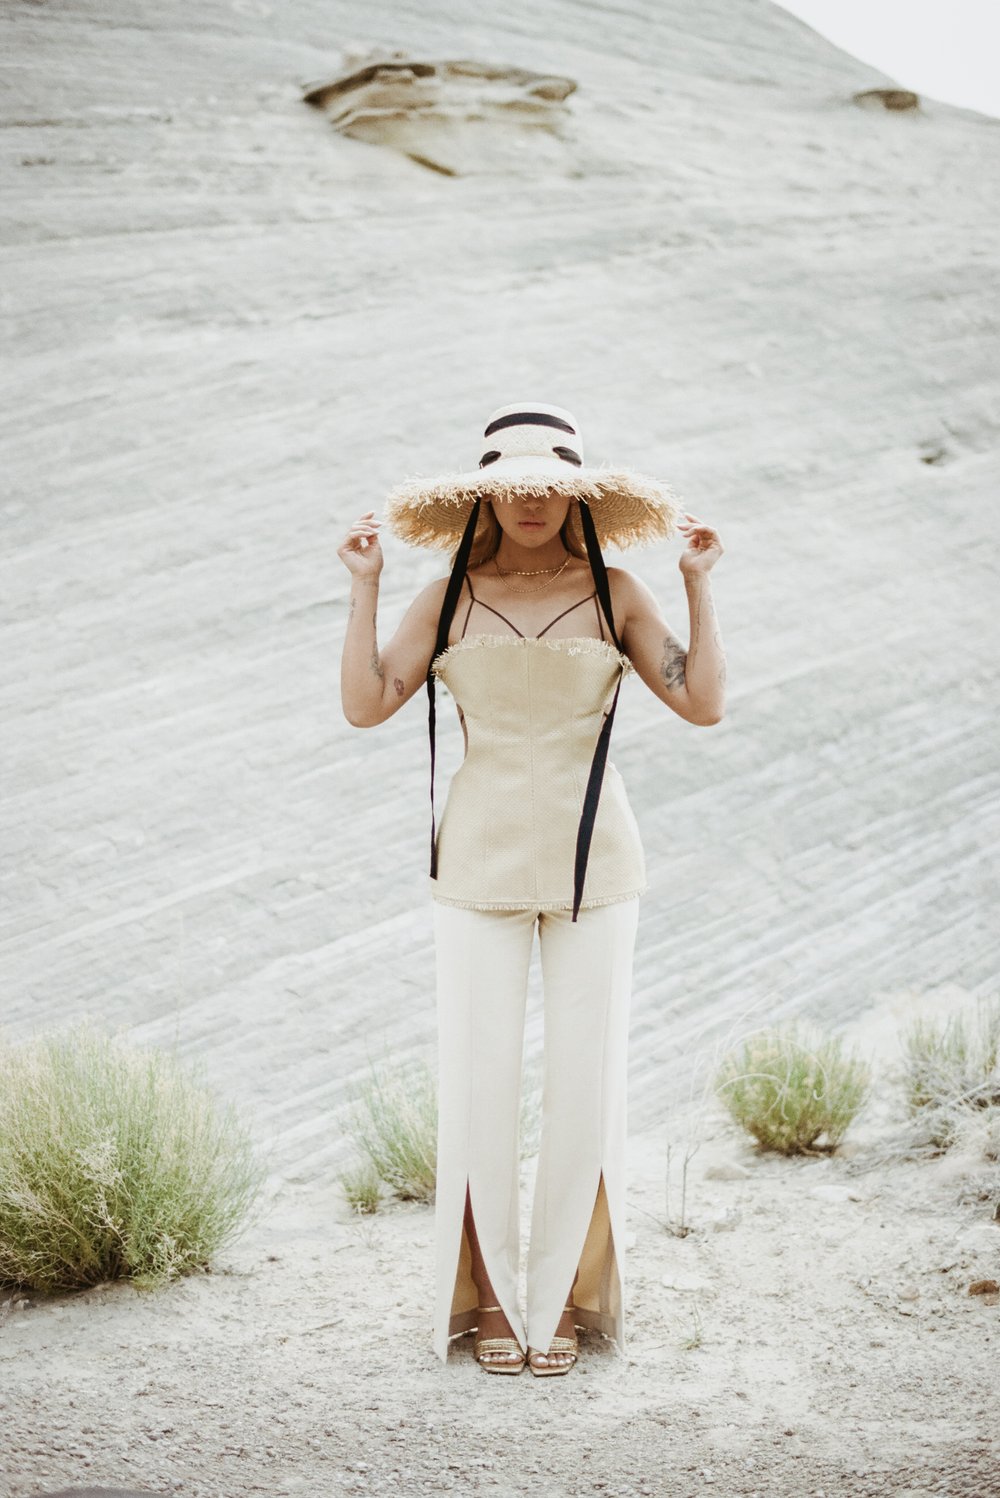 asian woman of color in straw editorial hat and top with cutouts black ribbon leaning on rock in desert